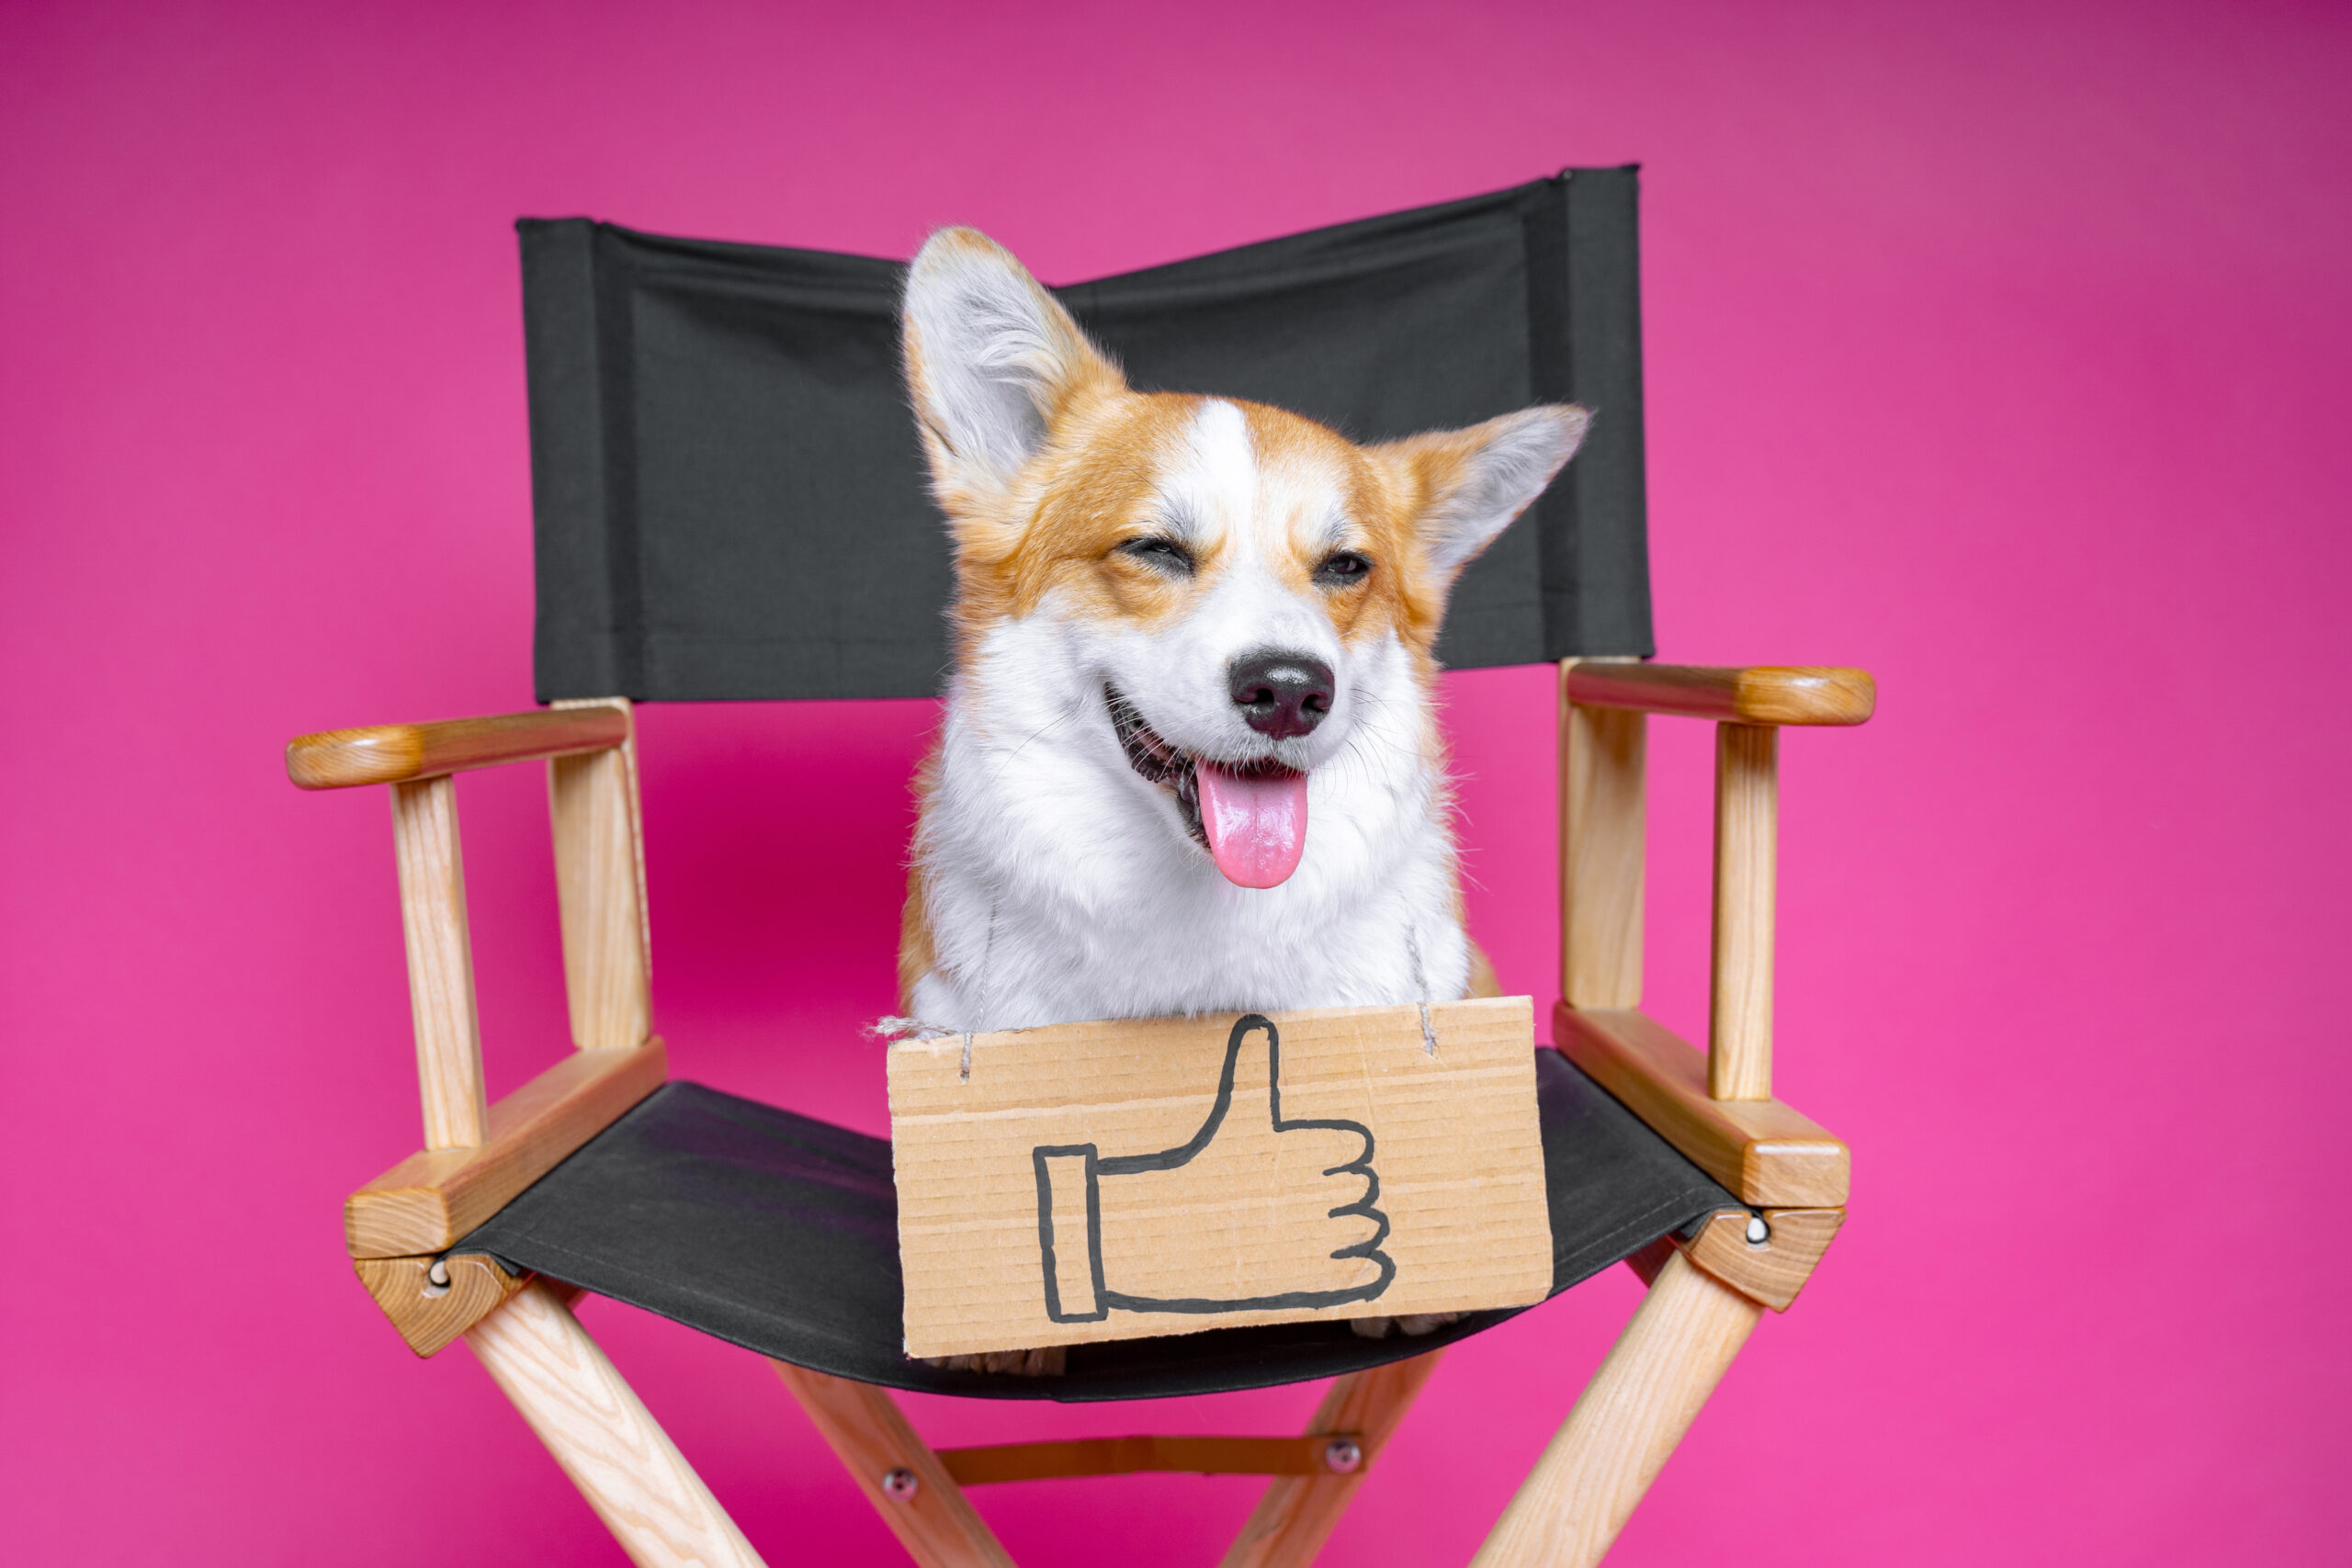 Dog sat on director's chair - Create video script